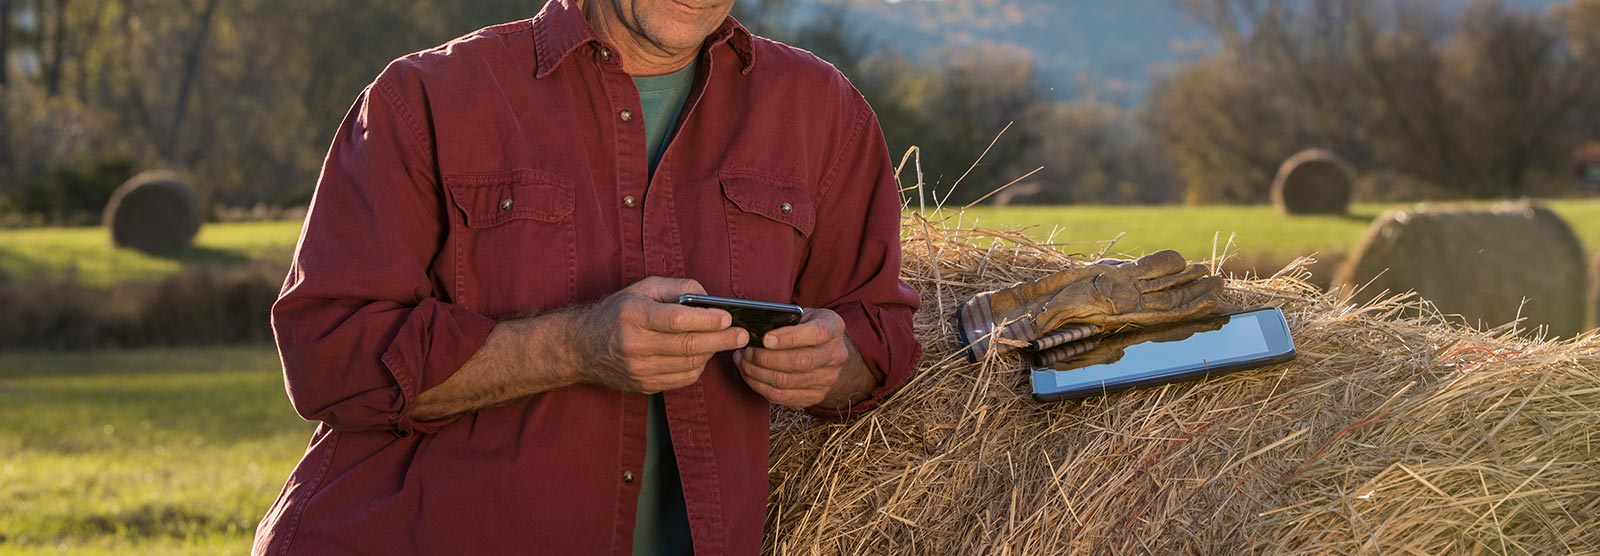 Farm owner with phone and tablet.